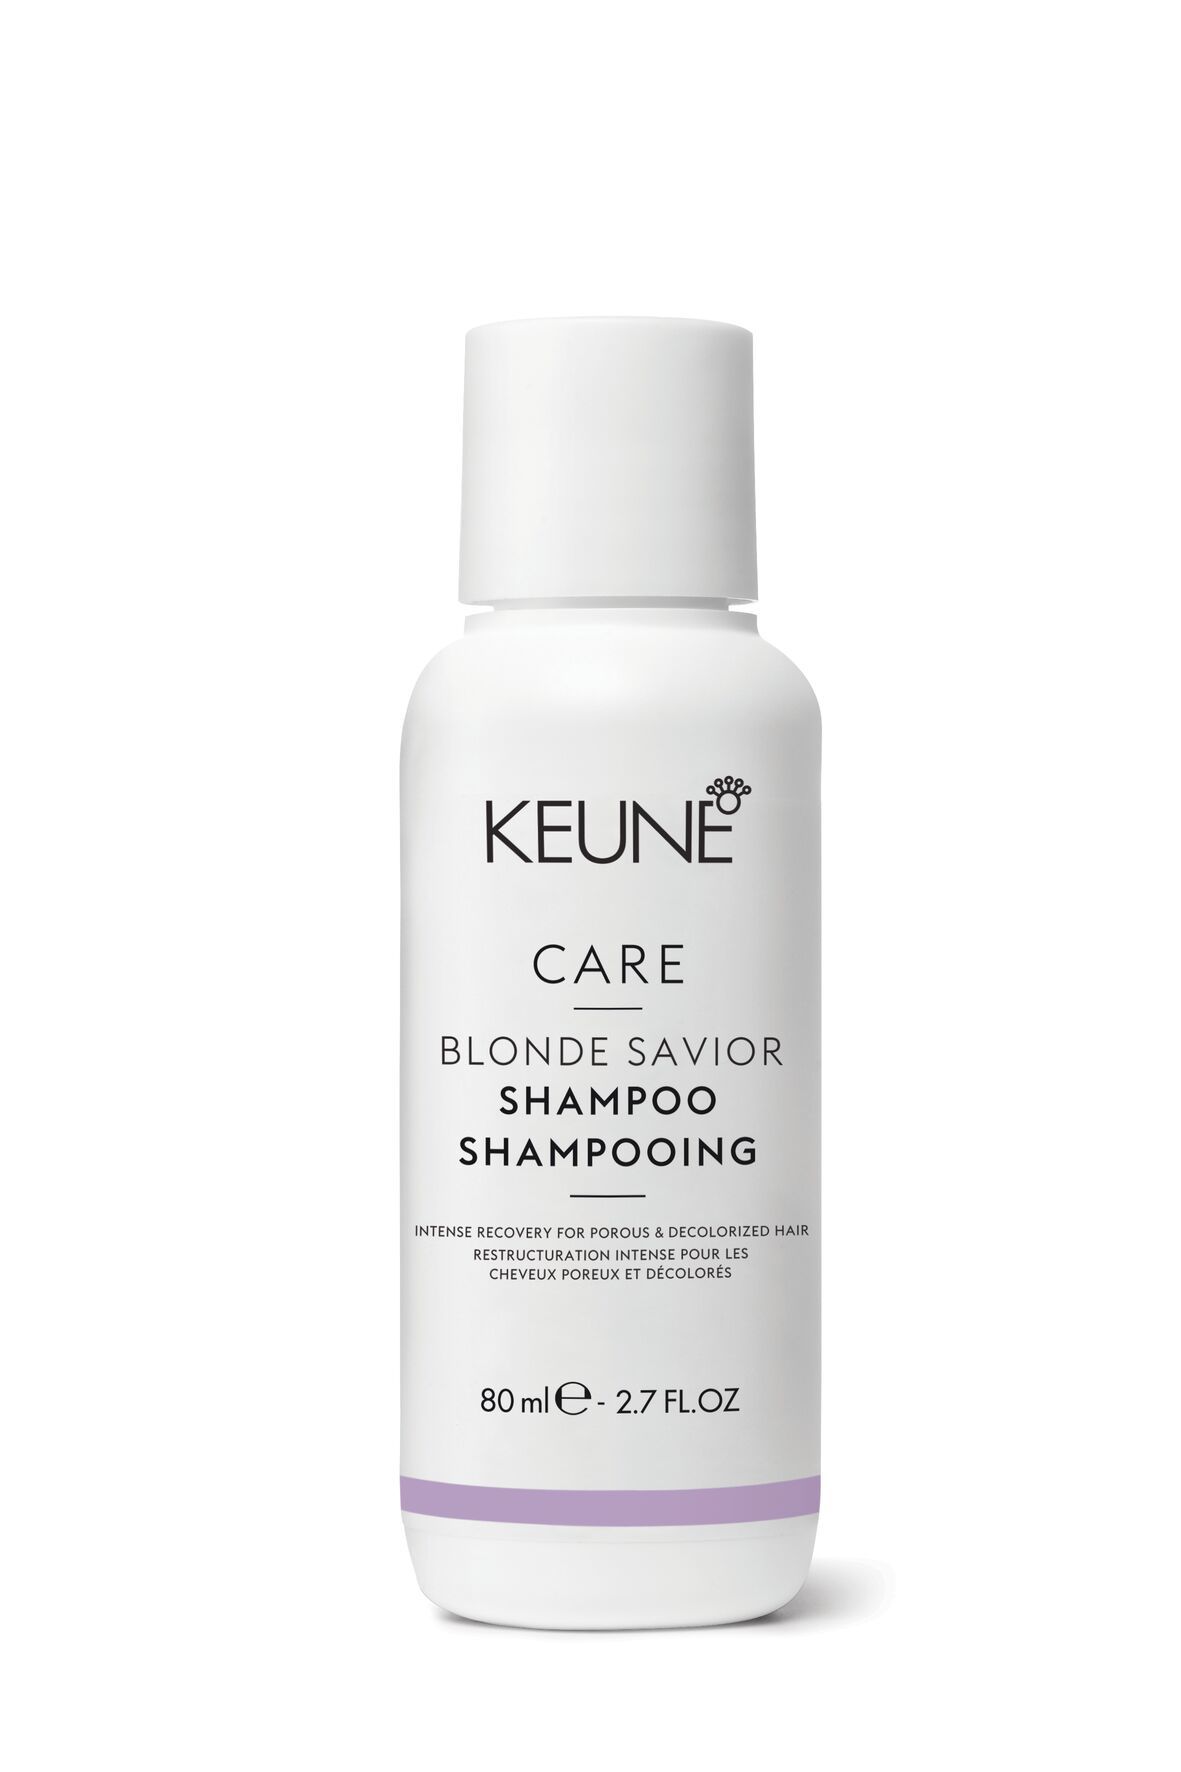 Repair and nourish your blonde hair with Care Blonde Savior Shampoo. It strengthens, moisturizes, and reduces hair breakage. Learn more on keune.ch!